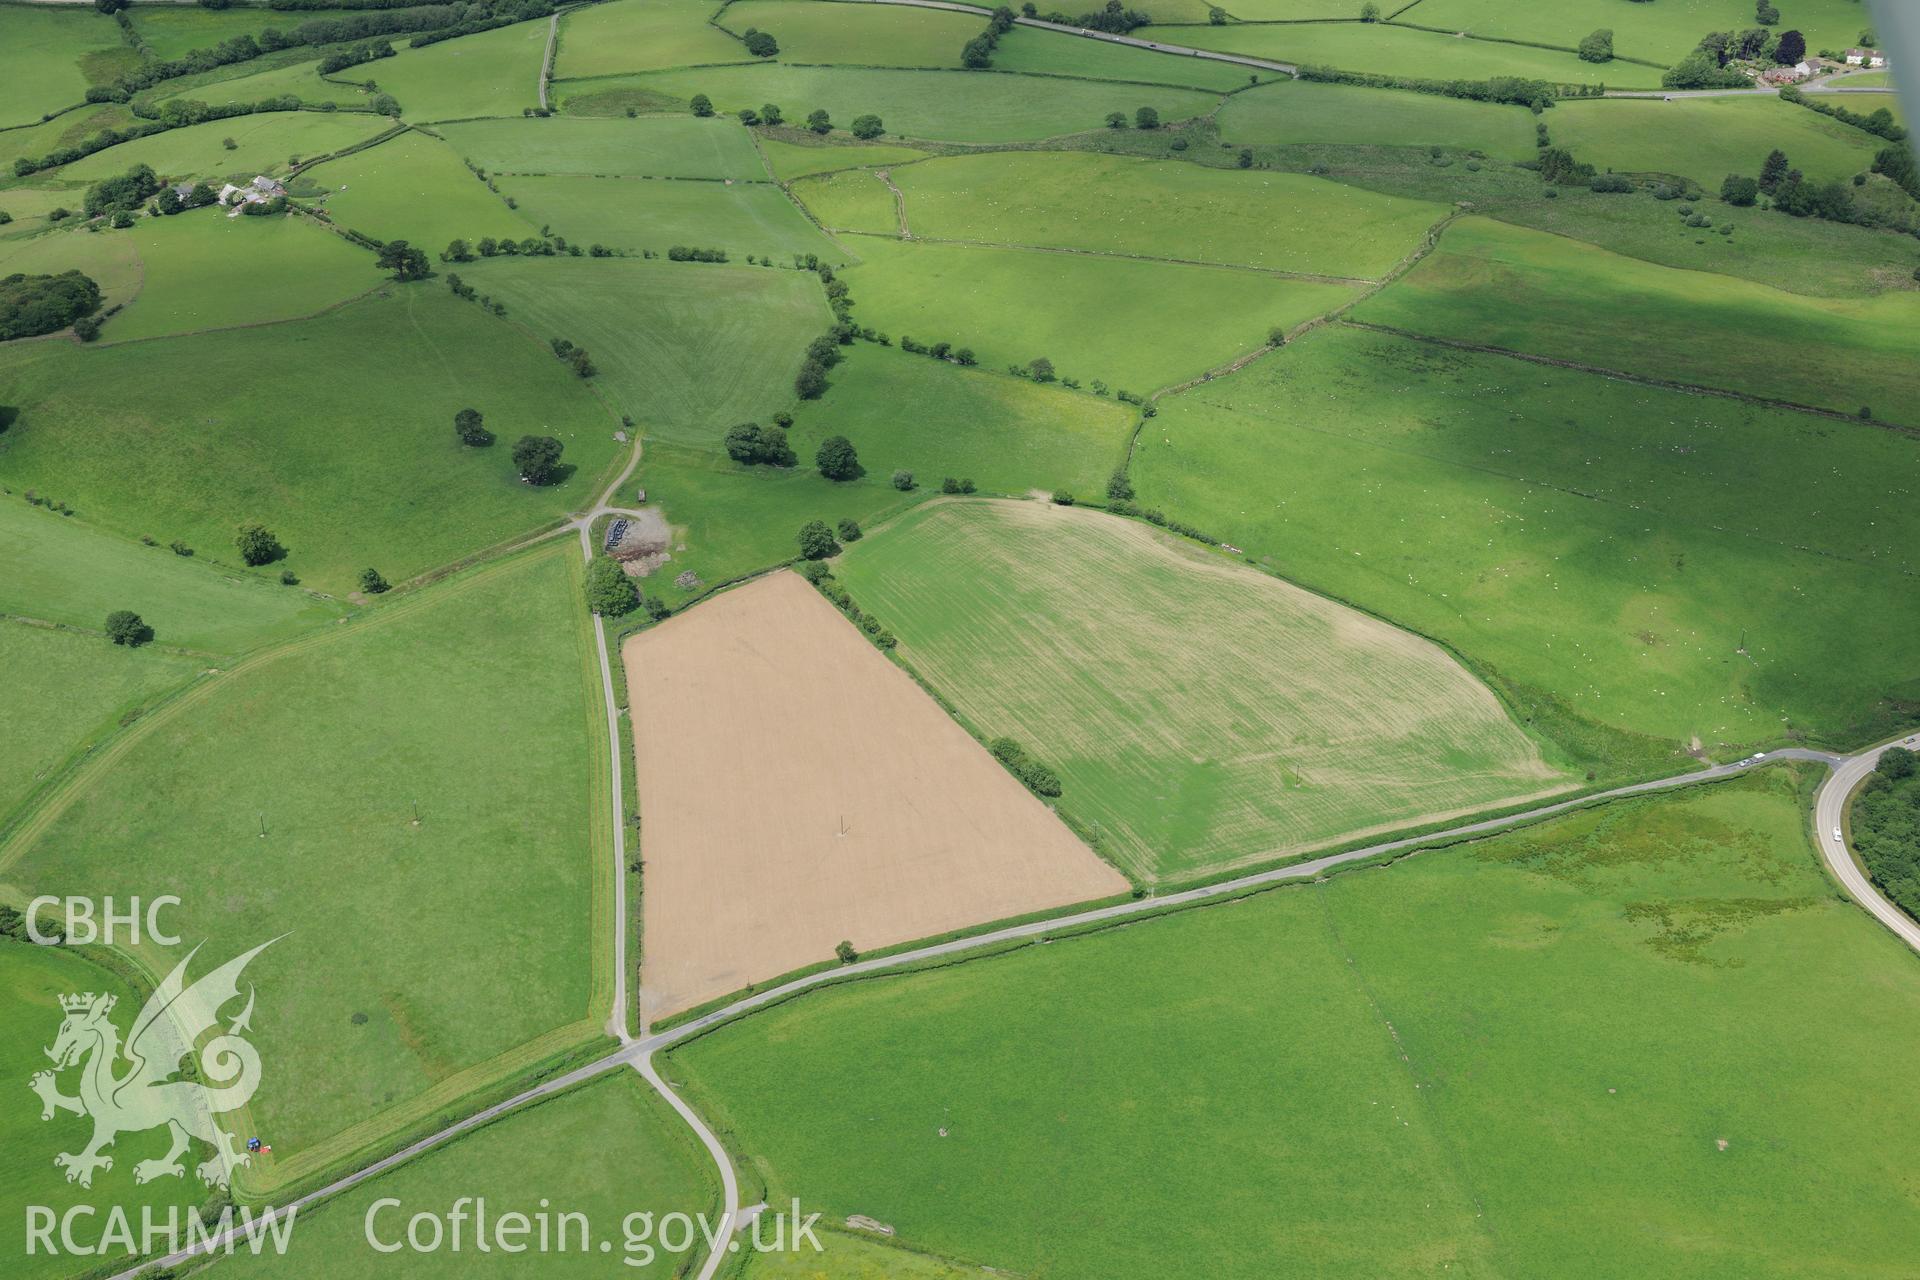 Cropmarks of Roman Camp west of Caerau Roman fort, west of Builth Wells. Oblique aerial photograph taken during the Royal Commission's programme of archaeological aerial reconnaissance by Toby Driver on 30th June 2015.